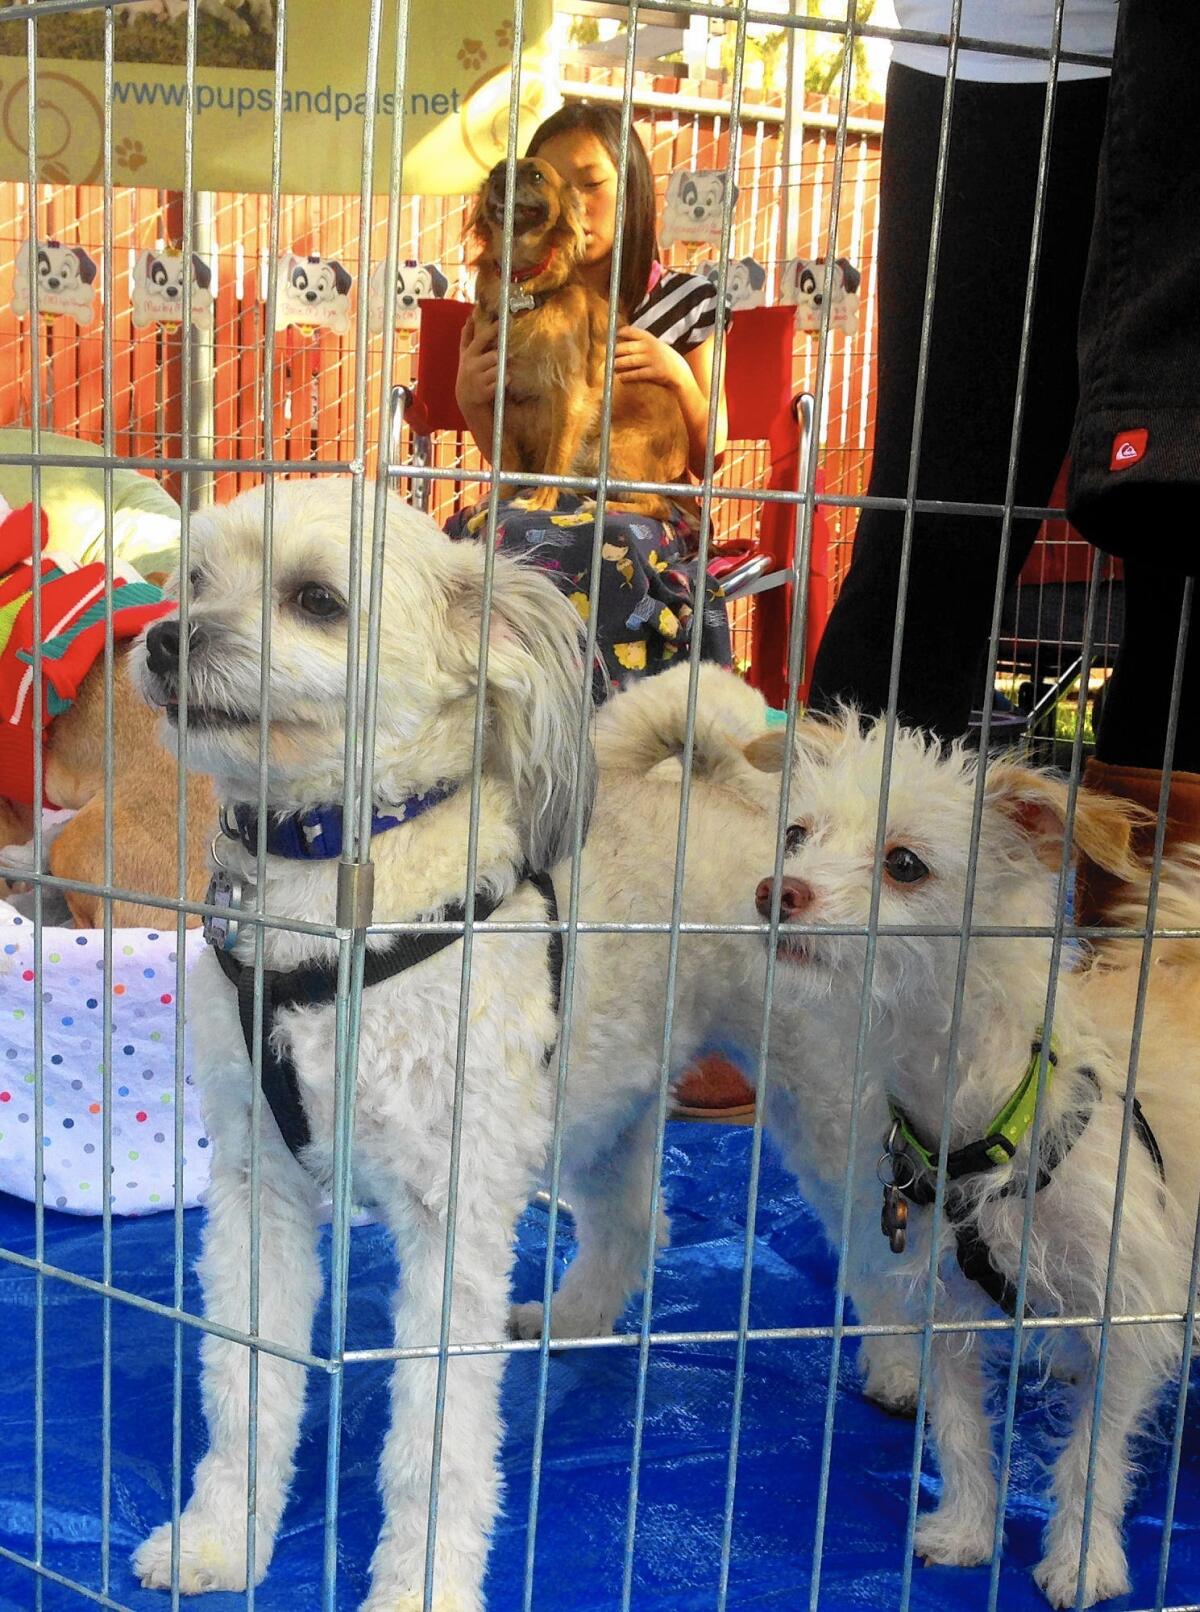 Puppies and a volunteer from Pets and Pals greet visitors at the Home for the Holidays pet adoption fair in Irvine.